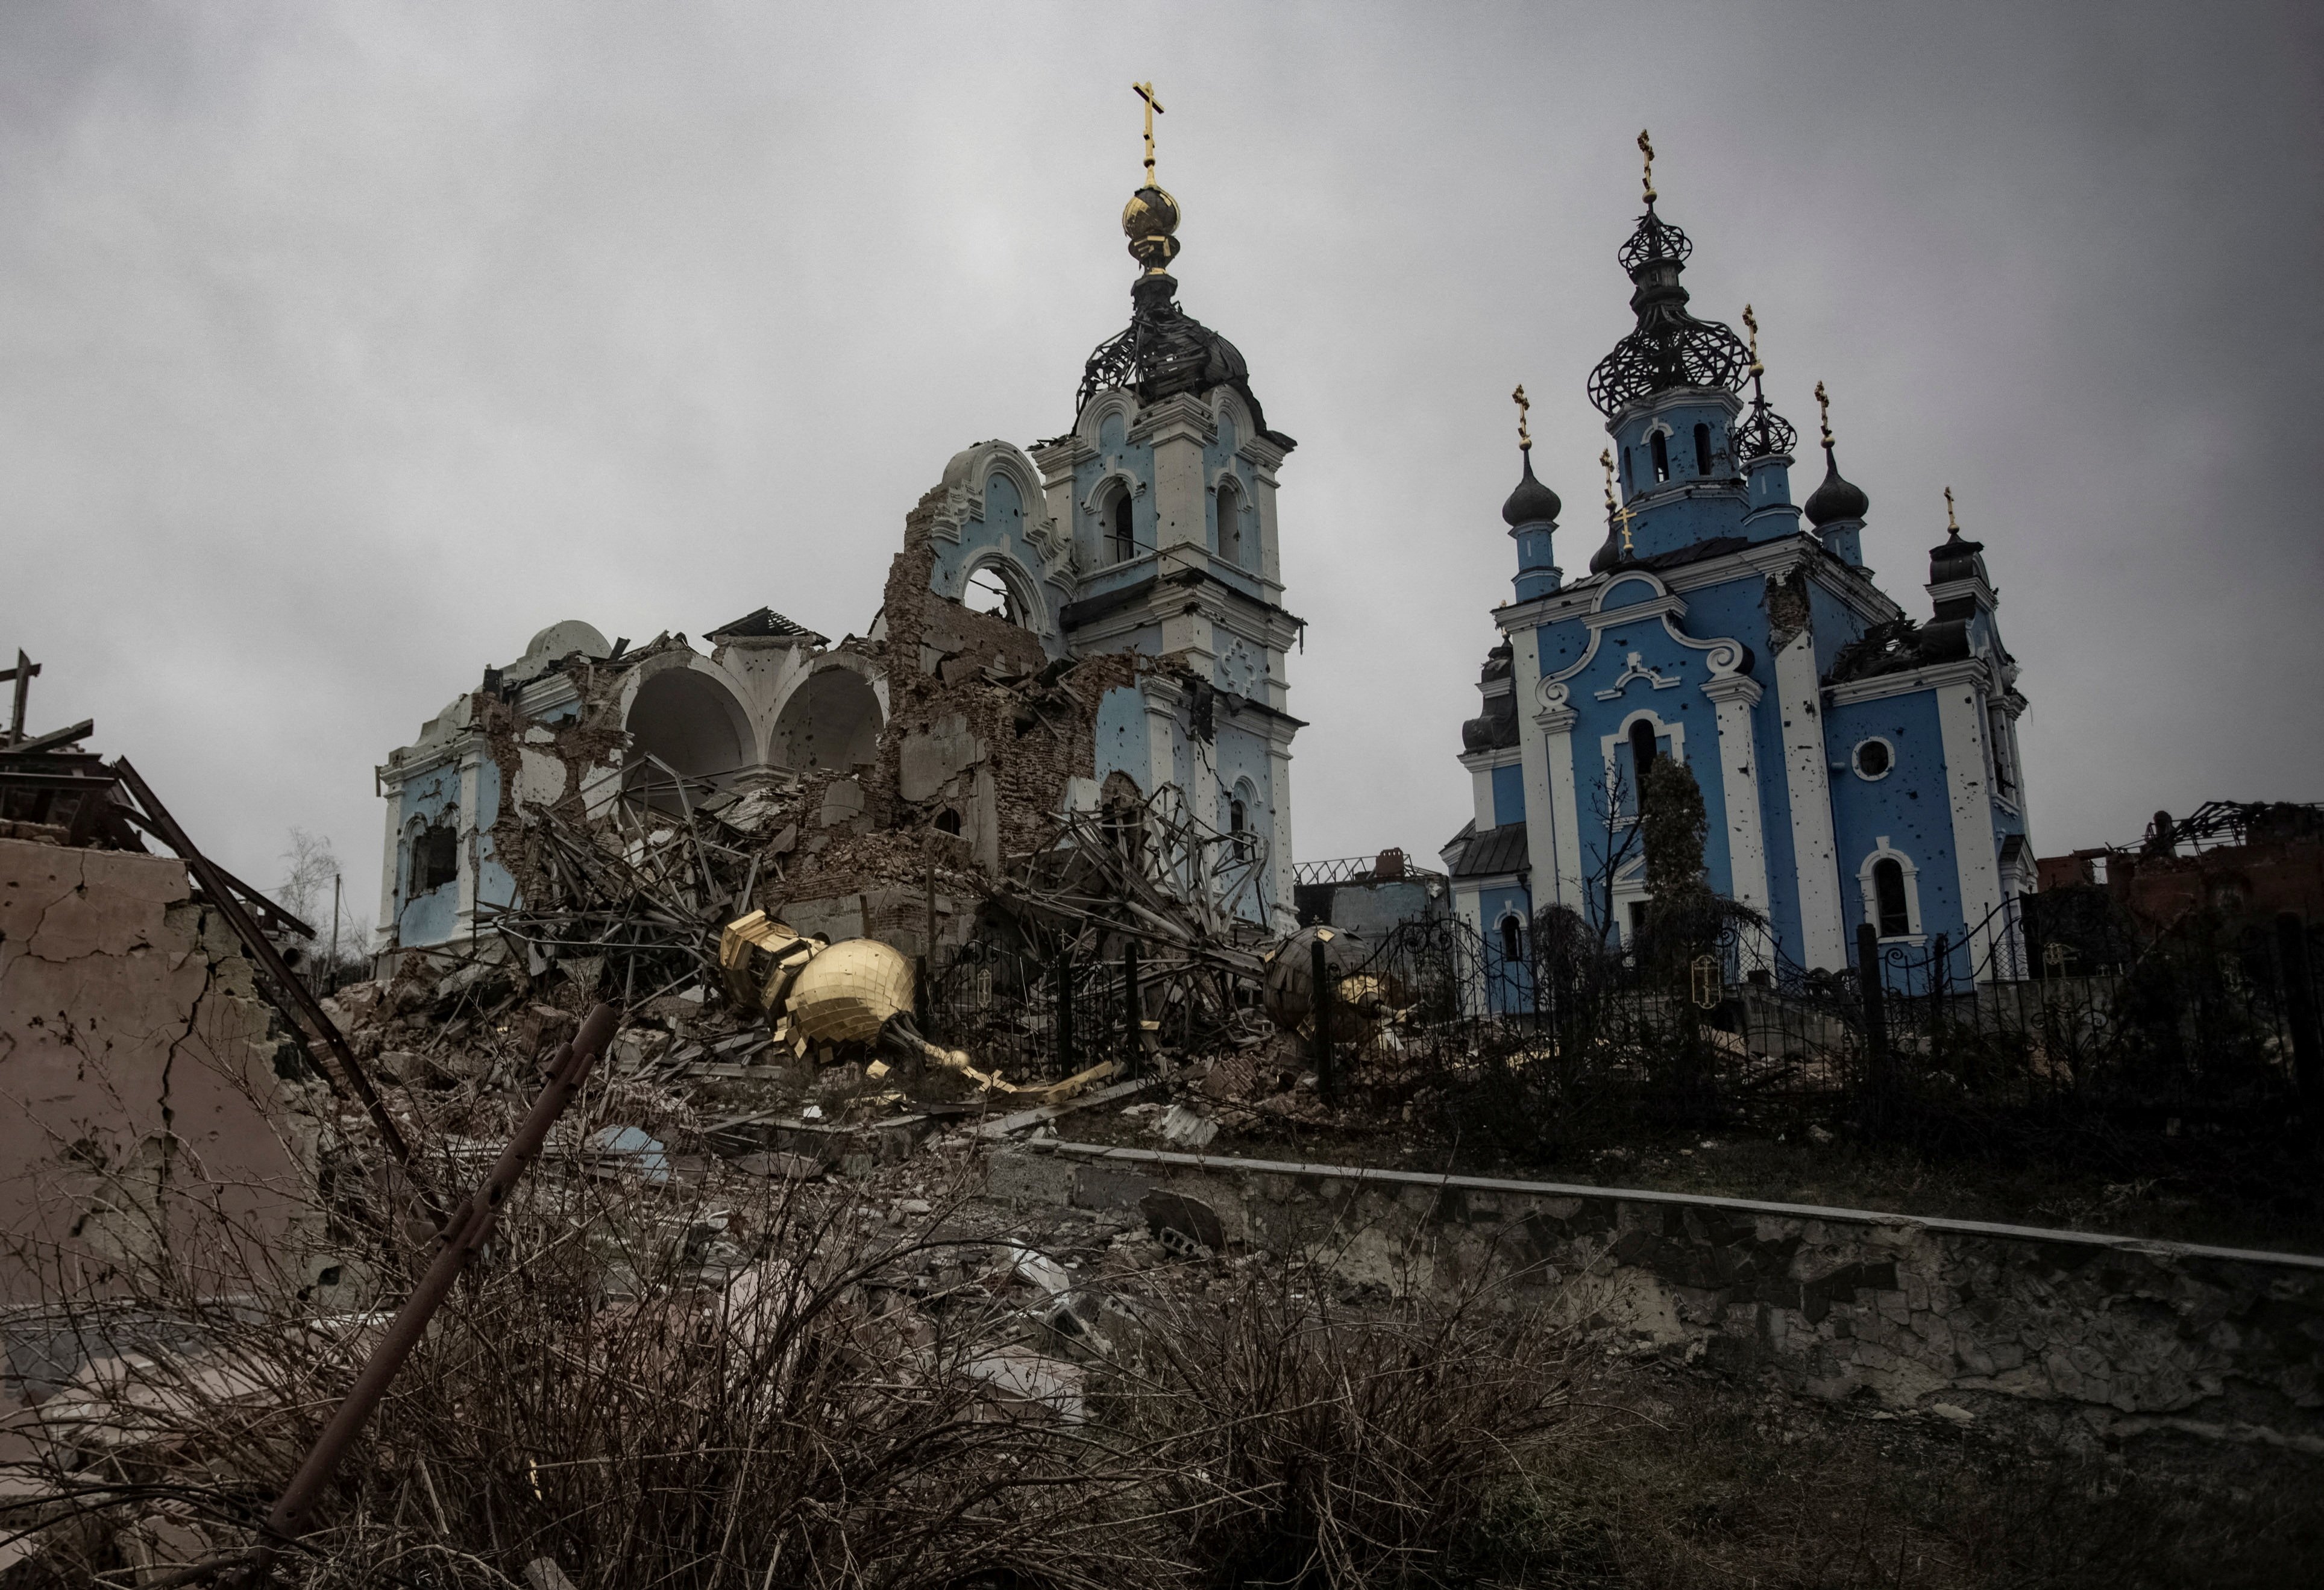 A destroyed Orthodox church is seen, during Russia's attack on Ukraine, in Bohorodychne, in the Donetsk region of Ukraine, Dec. 8. (CNS/Reuters/Yevhen Titov)